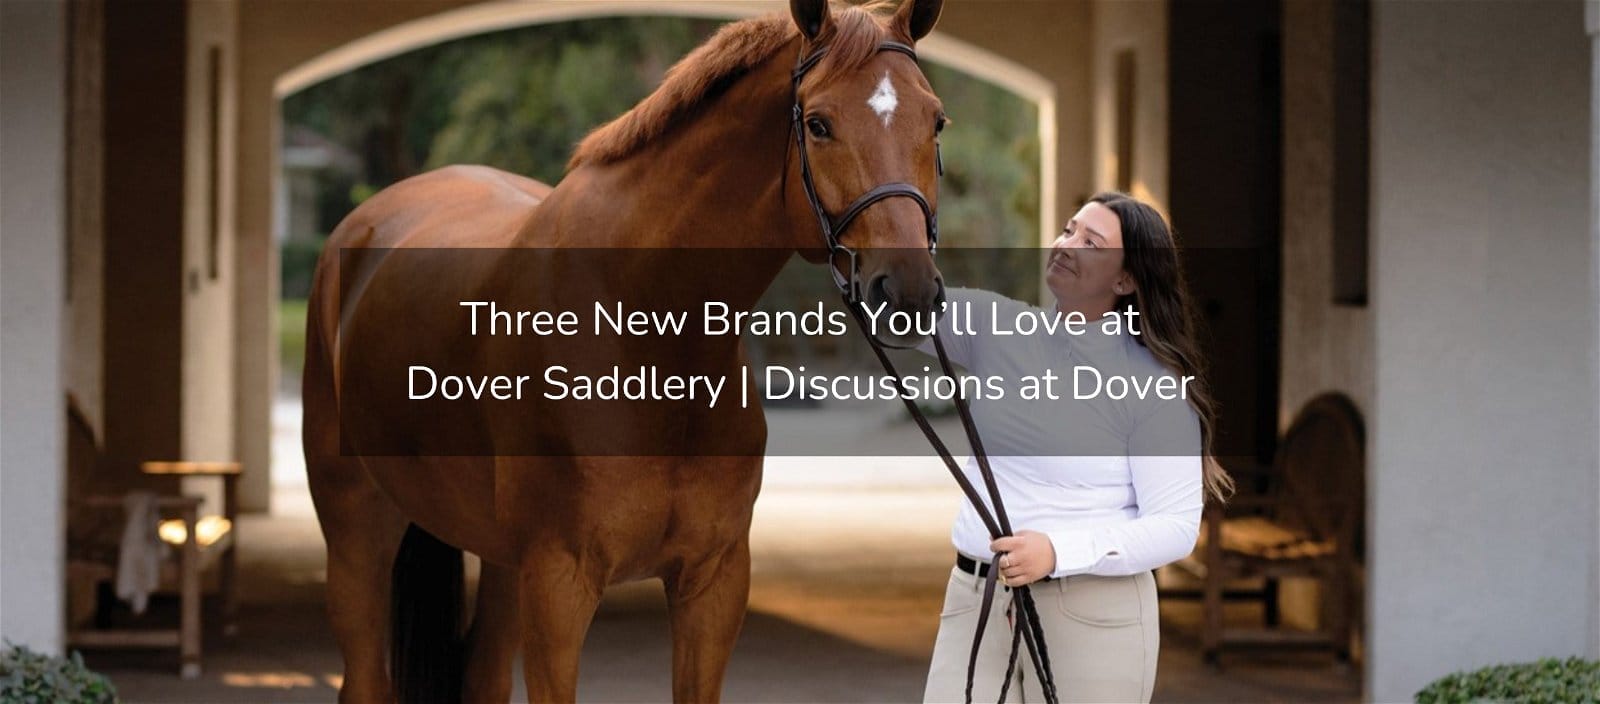 New Blog Post: "Three New Brands You’ll Love at Dover Saddlery"